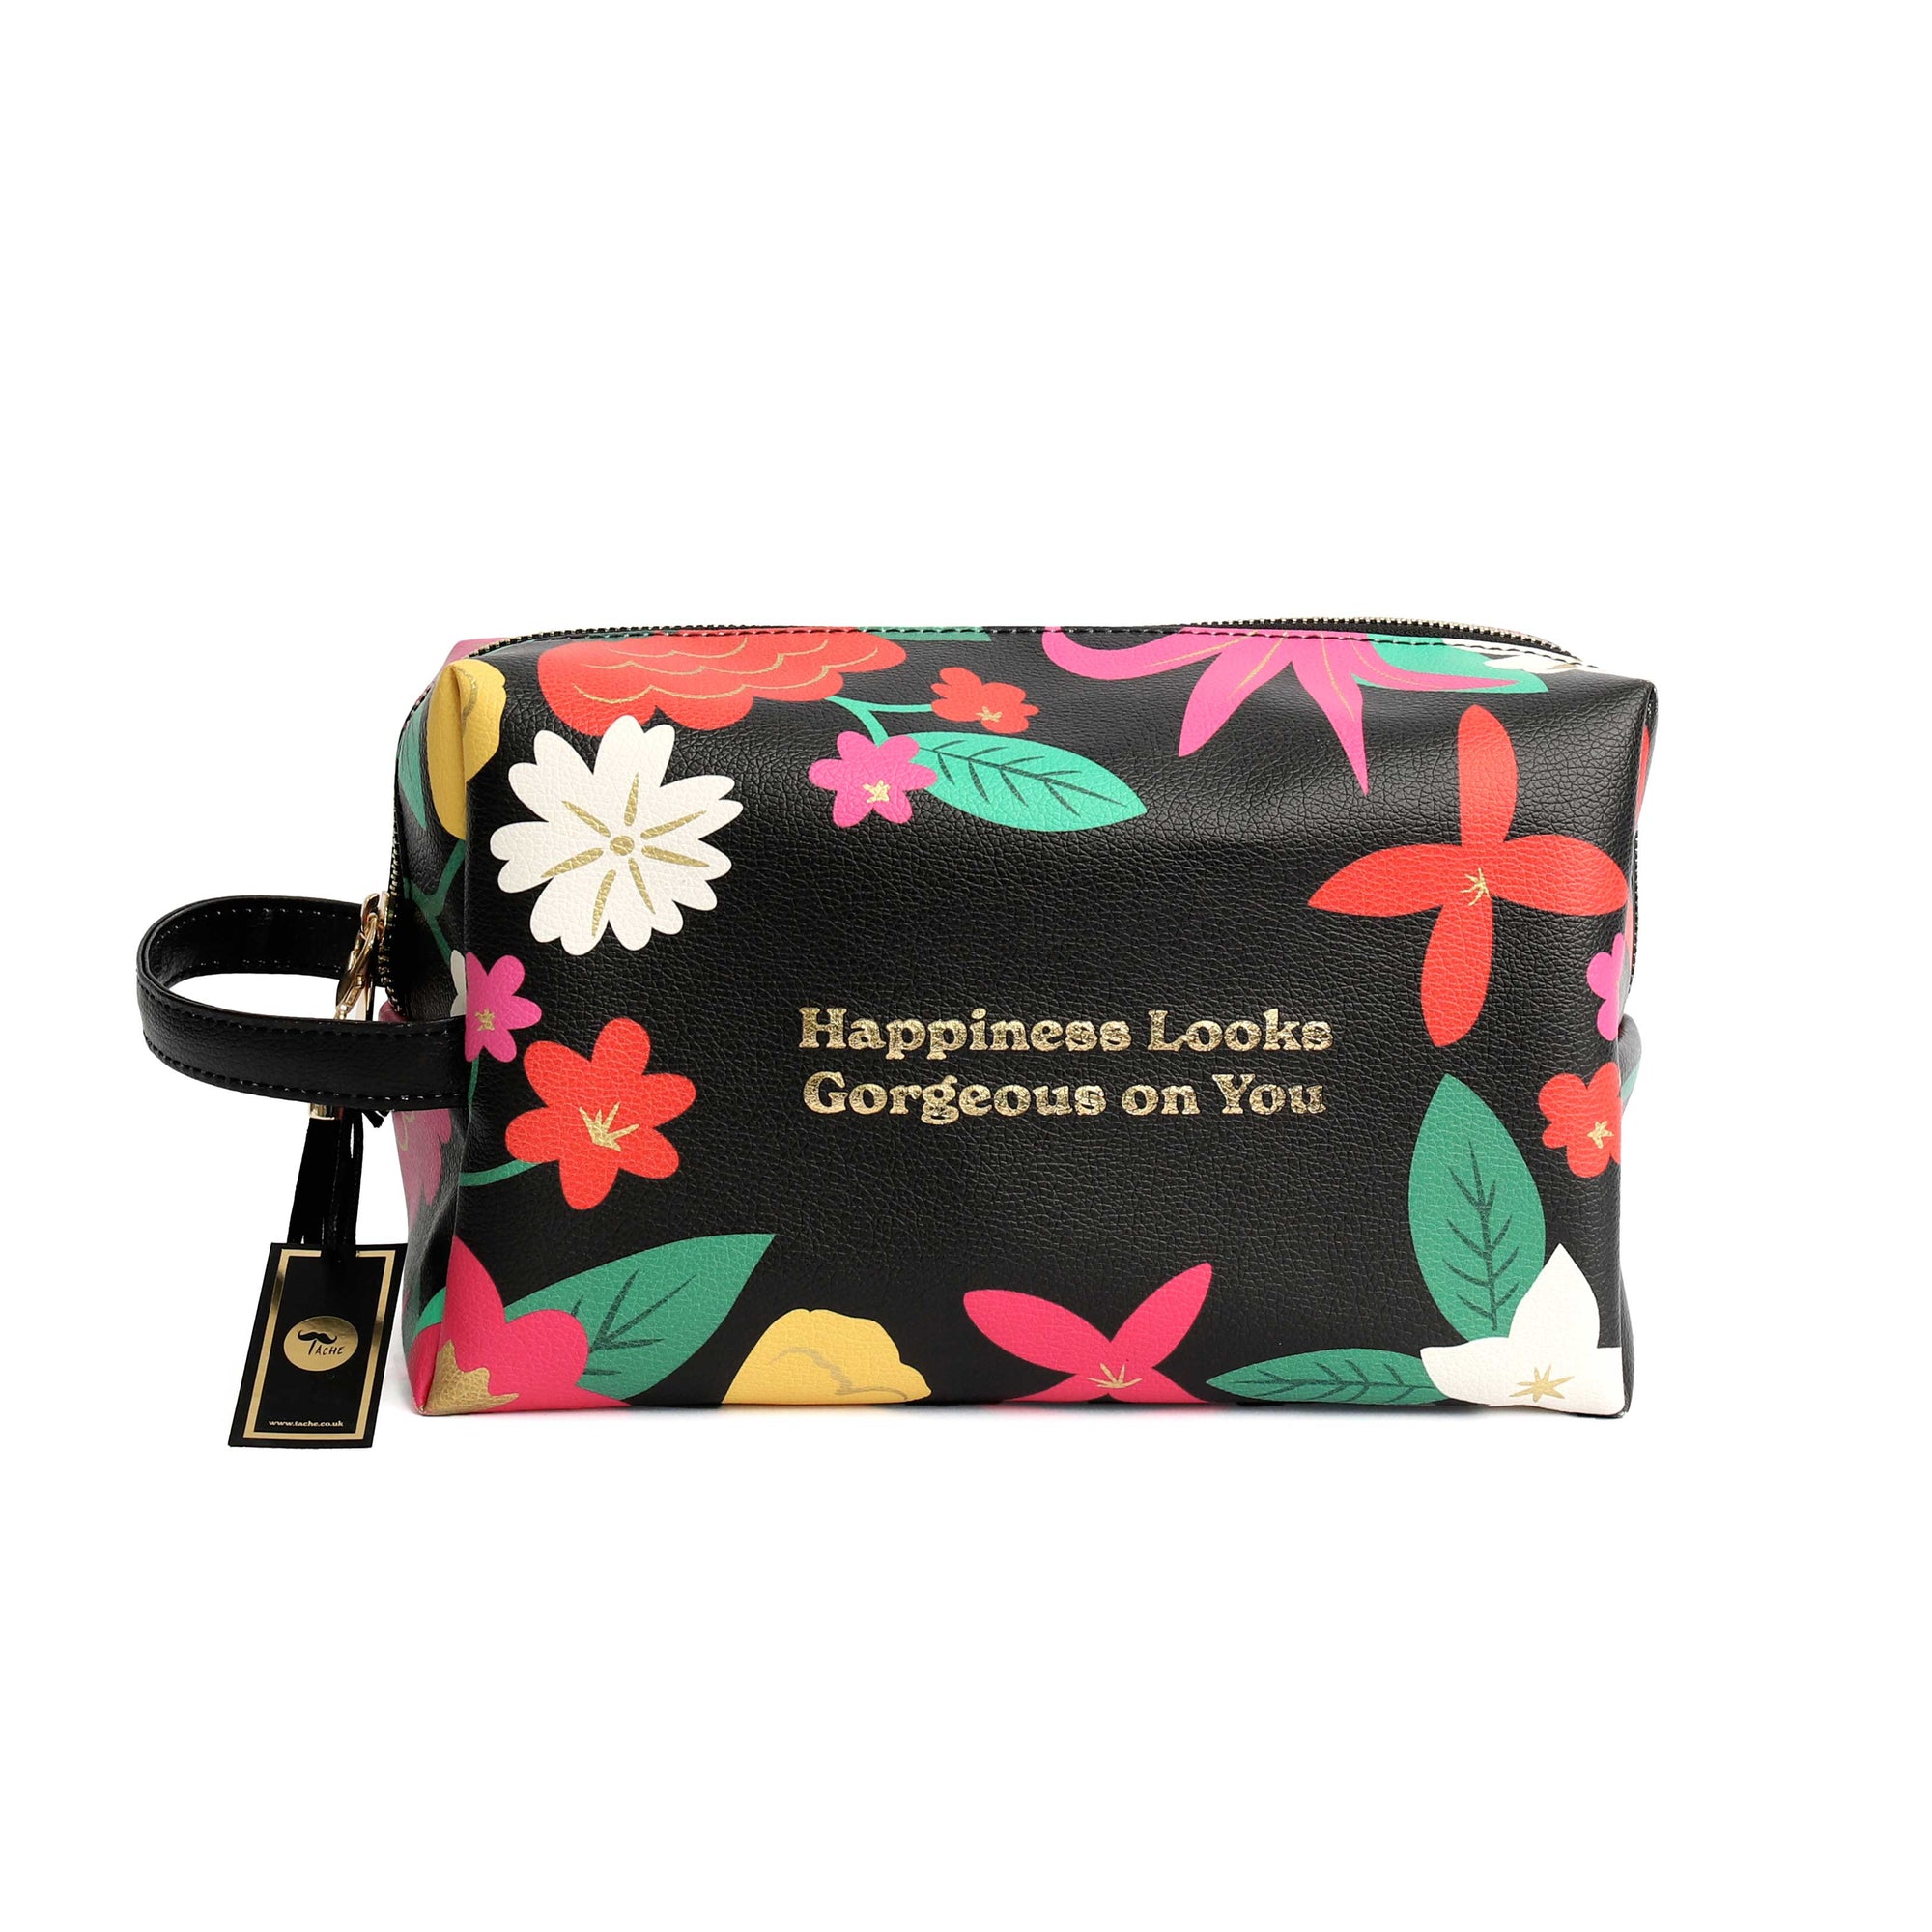 Happiness Looks Gorgeous On You Wash Bag